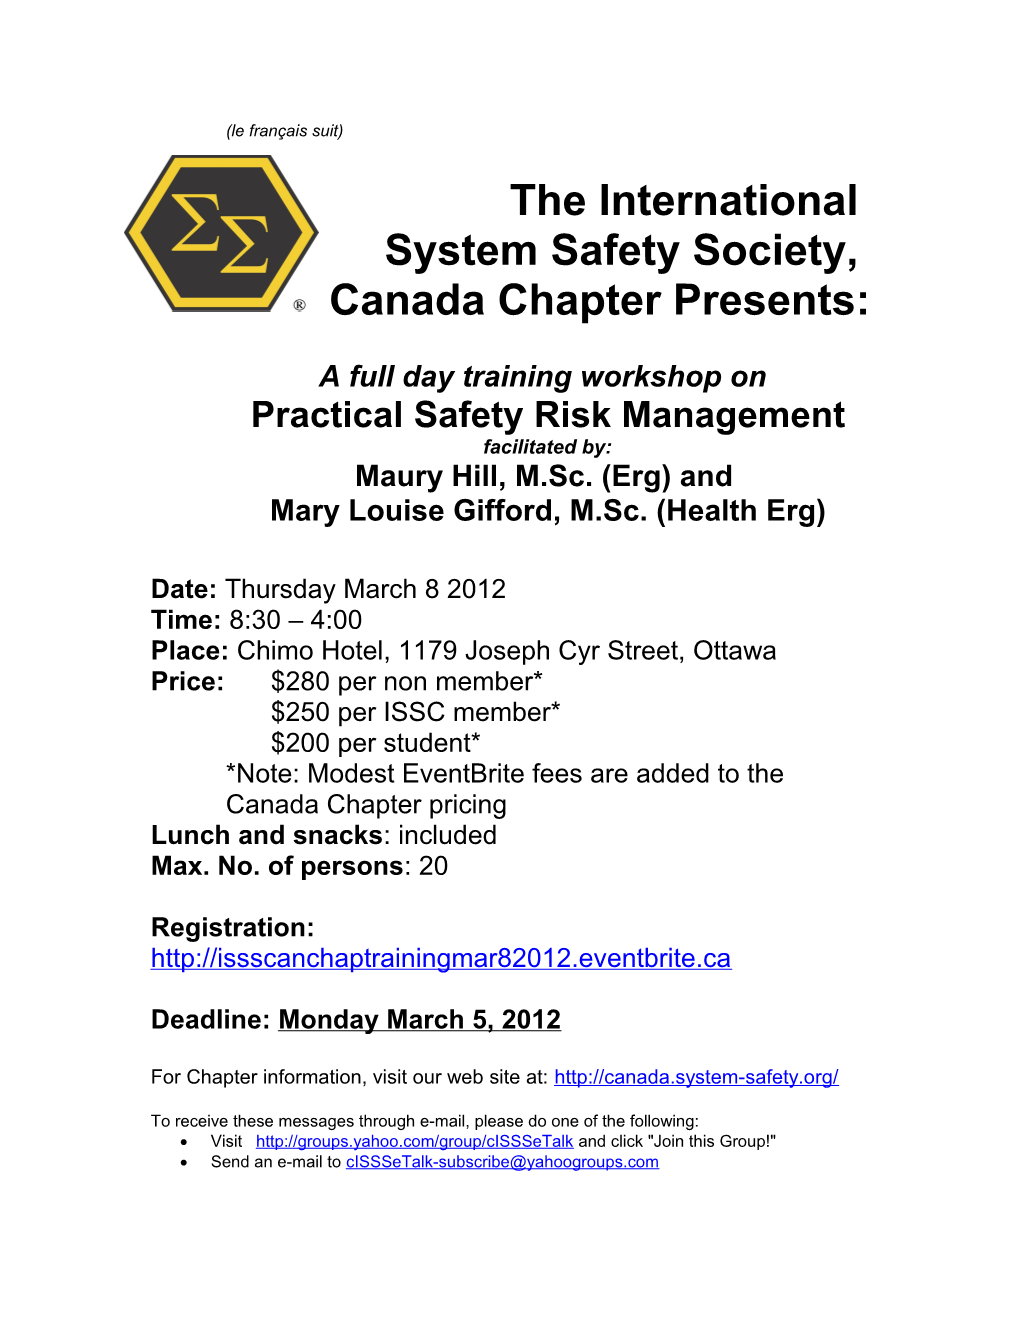 The International System Safety Society, Canada Chapter Presents